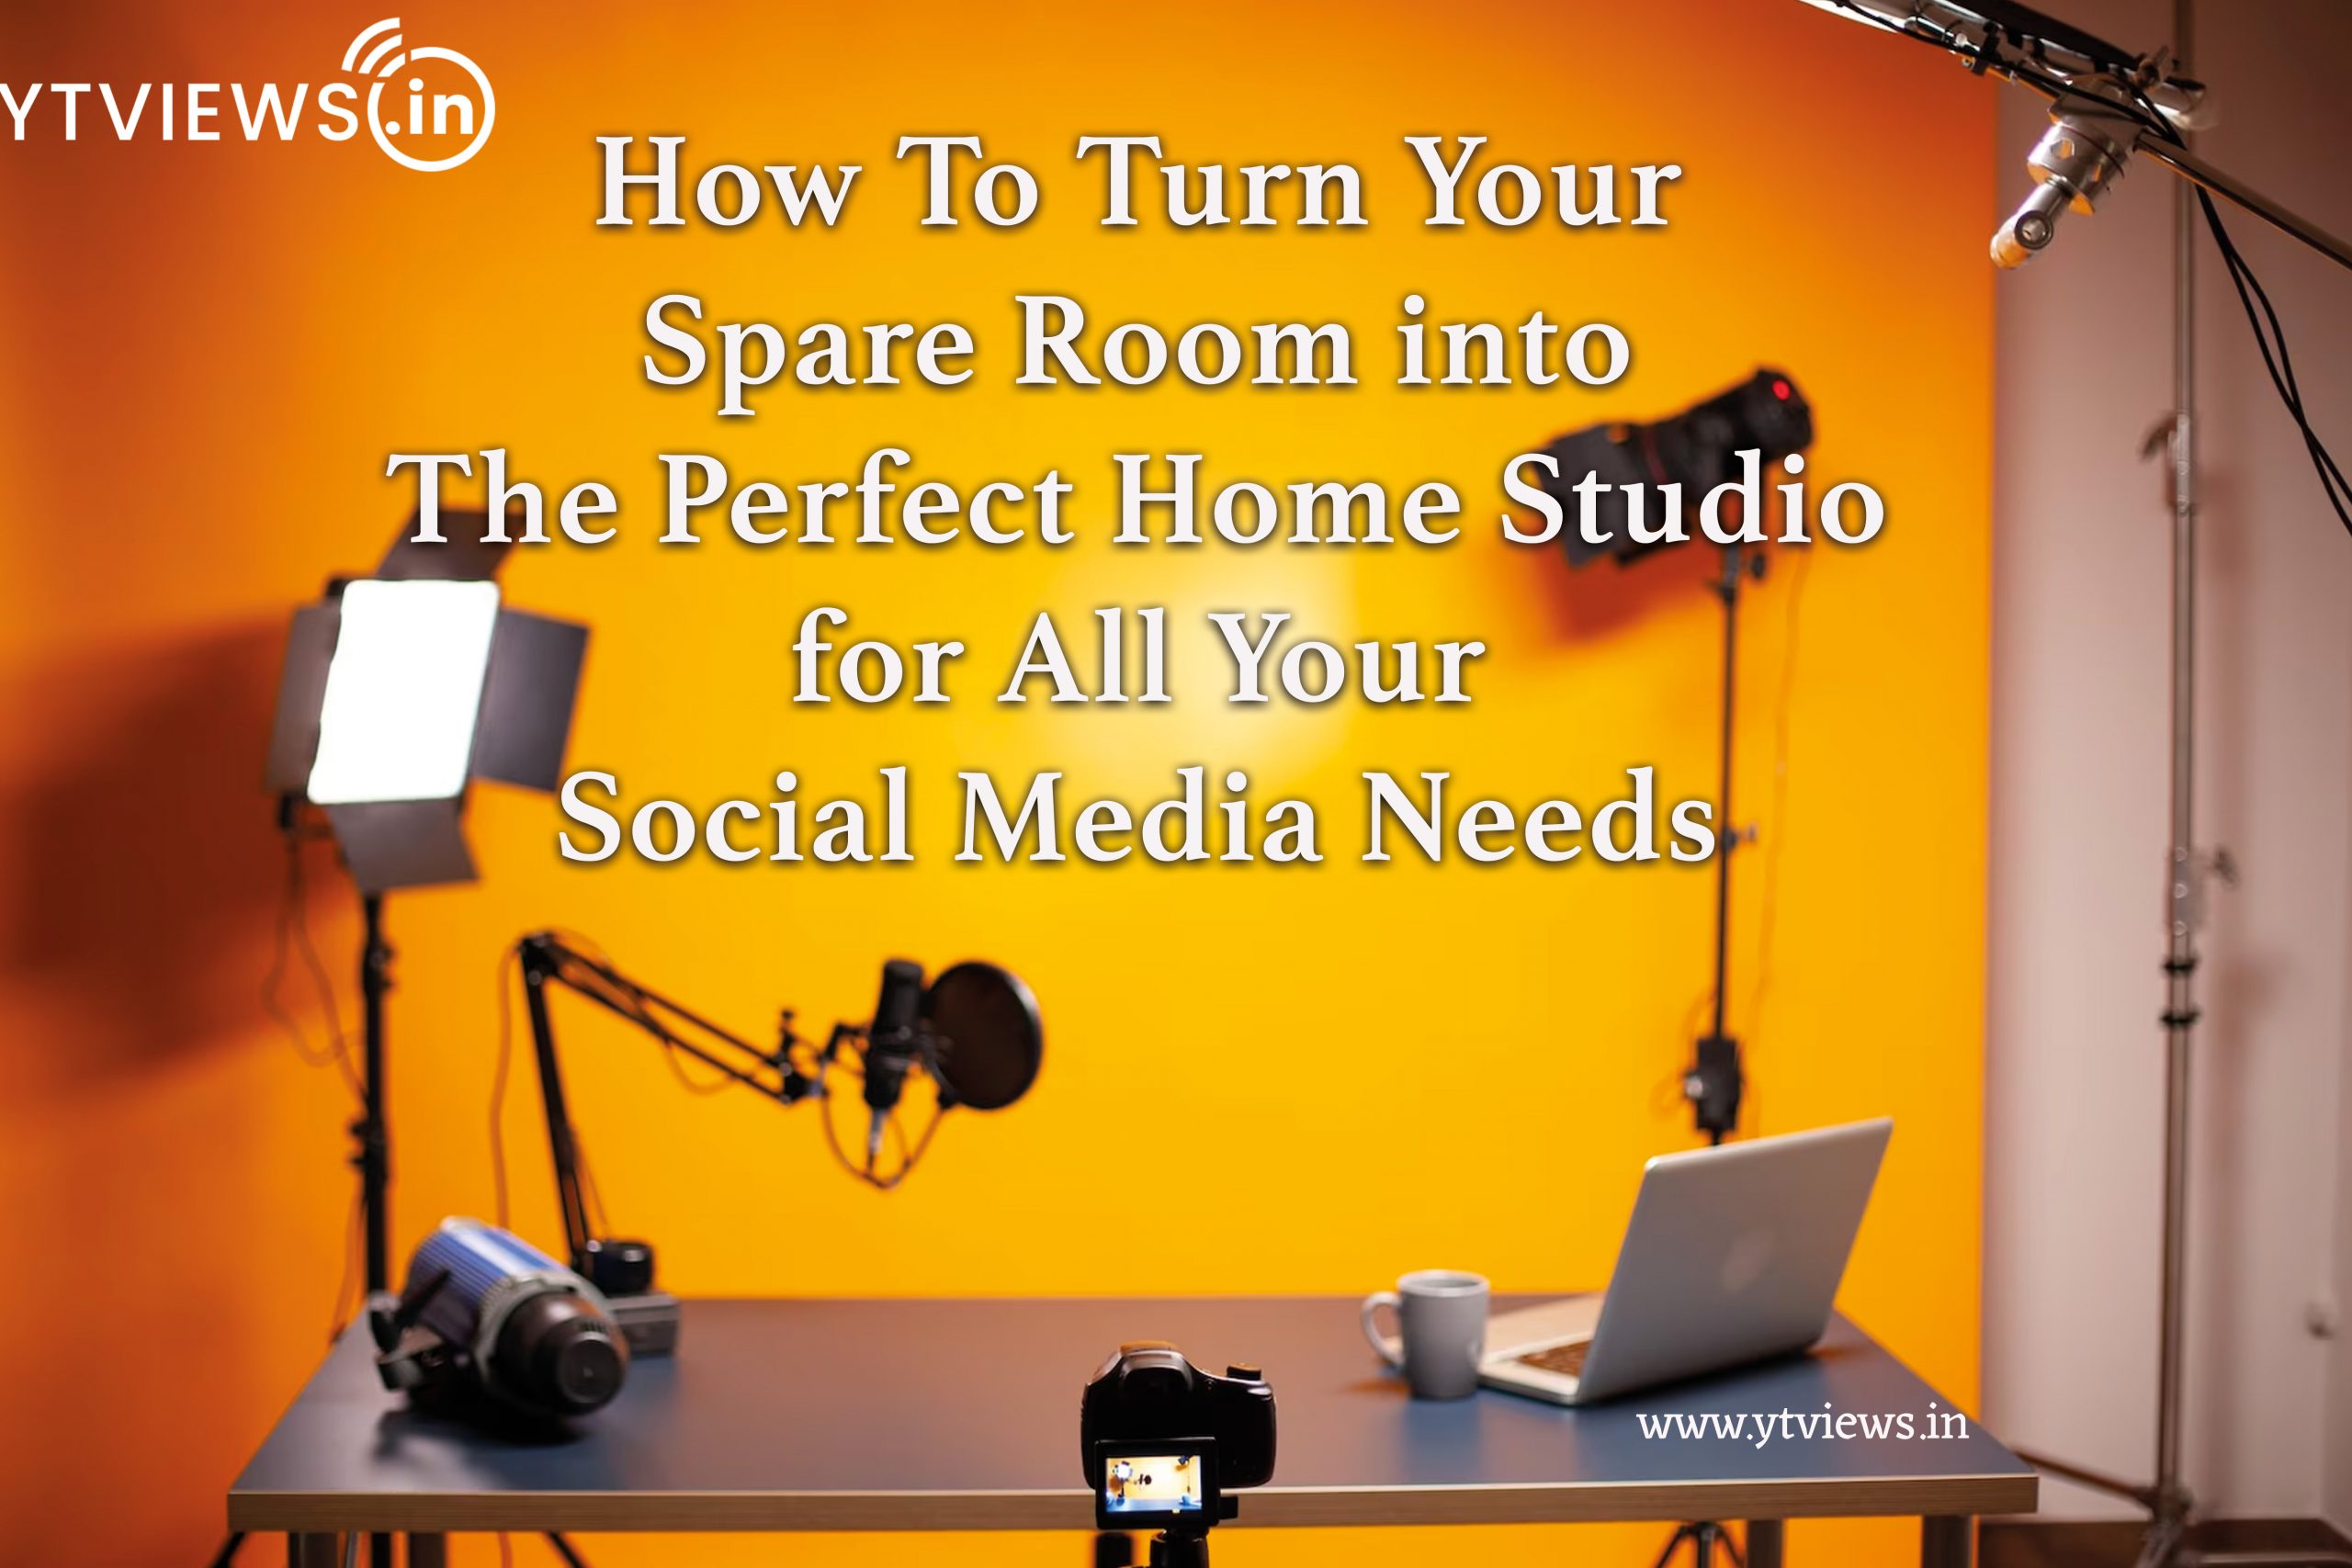 How To Turn Your Spare Room Into The Perfect Home Studio for all of your social media needs